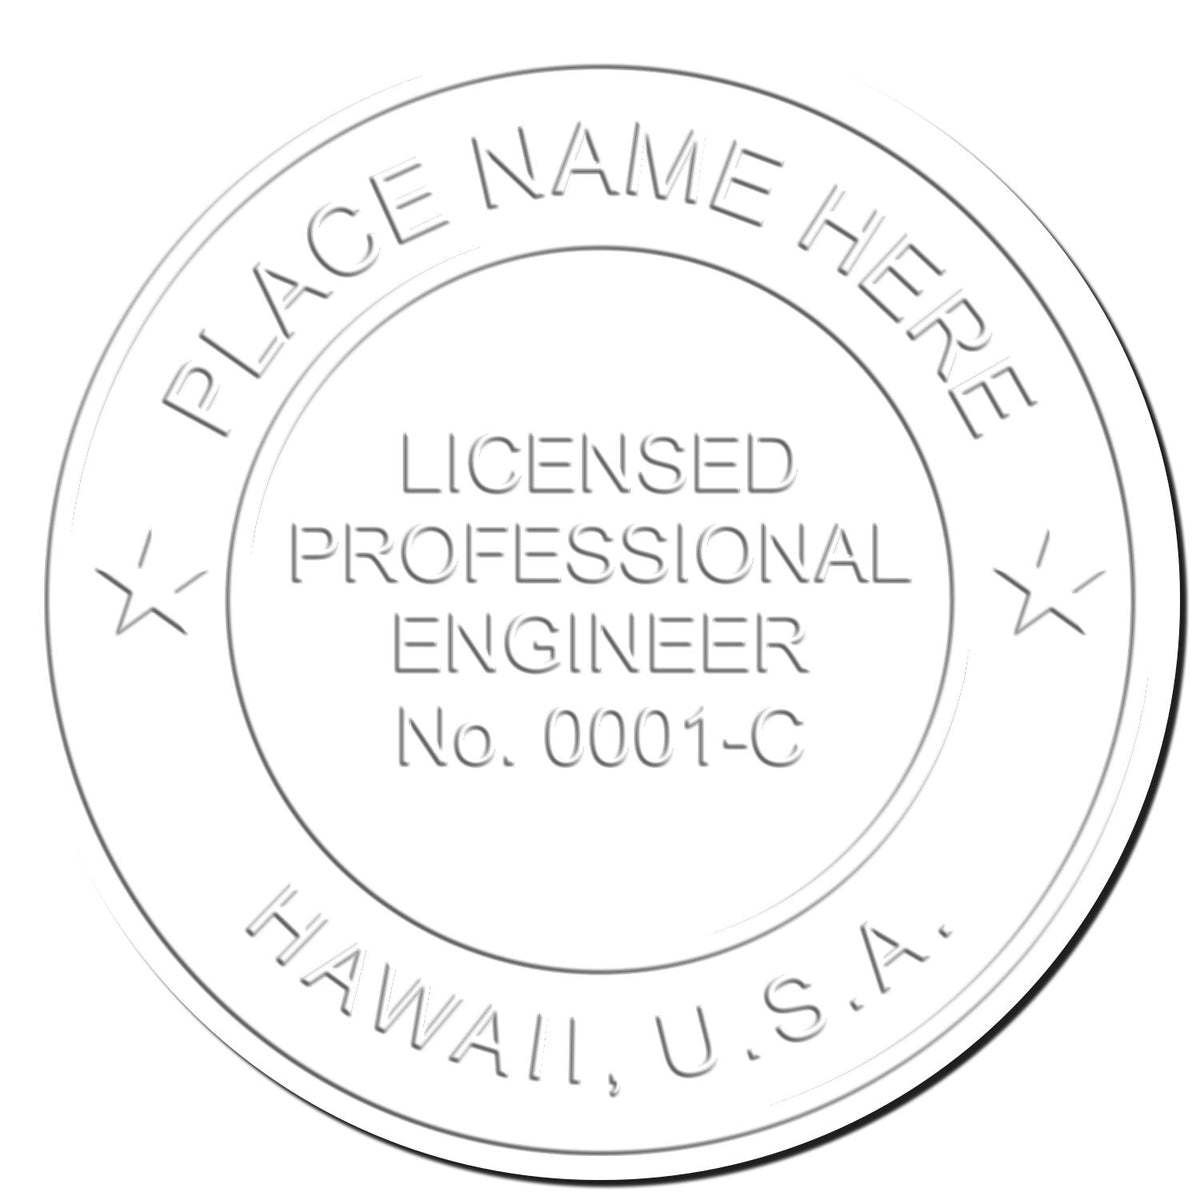 The Long Reach Hawaii PE Seal stamp impression comes to life with a crisp, detailed photo on paper - showcasing true professional quality.